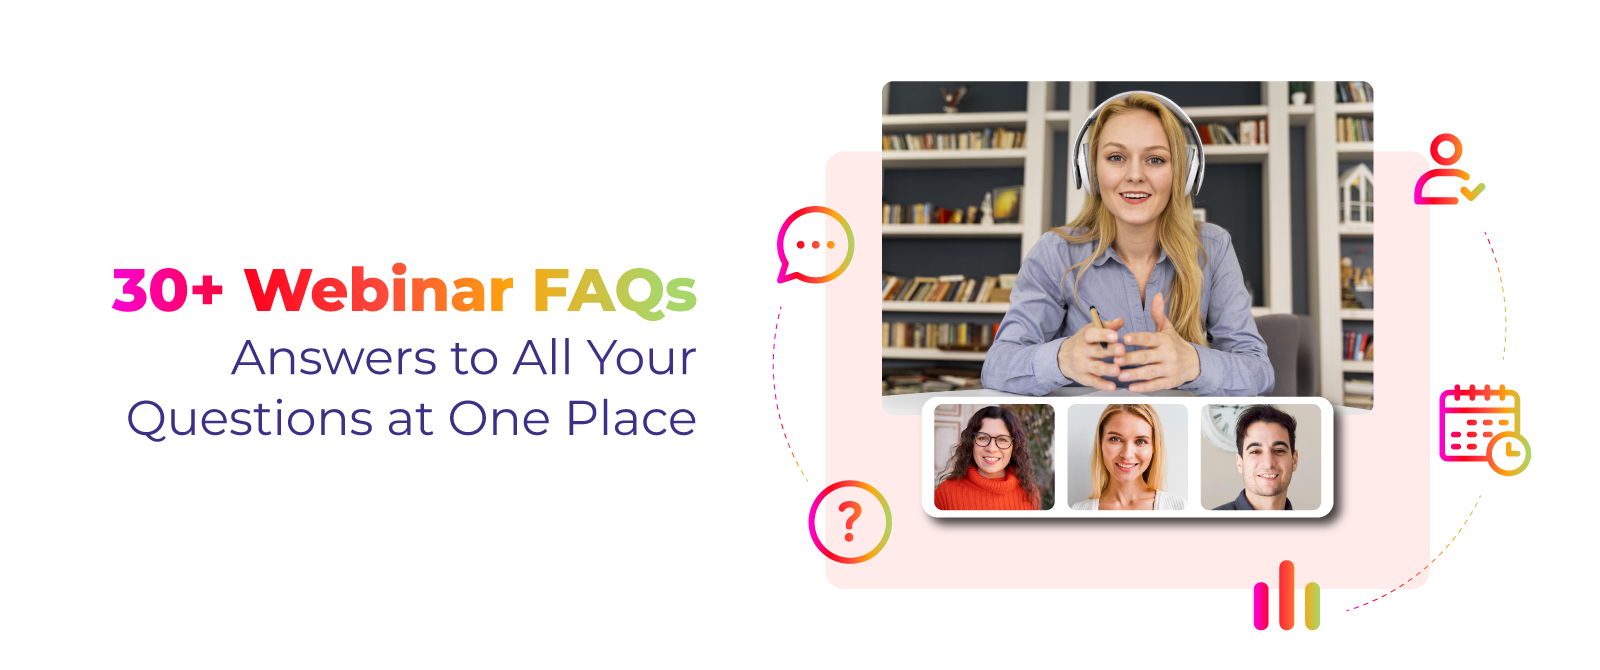 30+ Webinar FAQs – Answers to All Your Questions at One Place